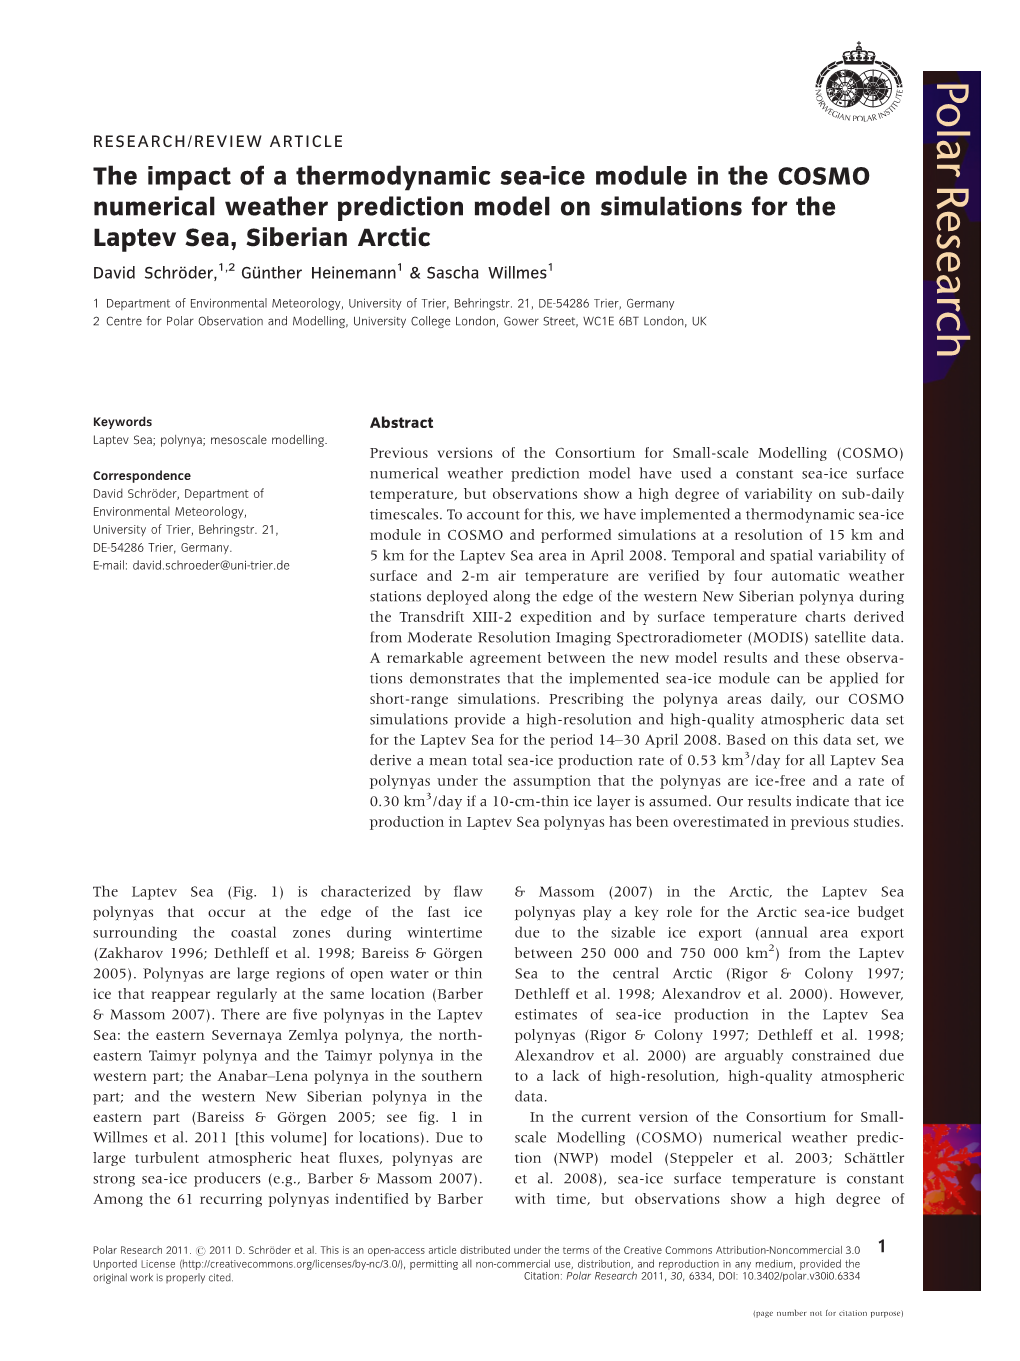 The Impact of a Thermodynamic Sea-Ice Module in the COSMO Numerical Weather Prediction Model on Simulations for the Laptev